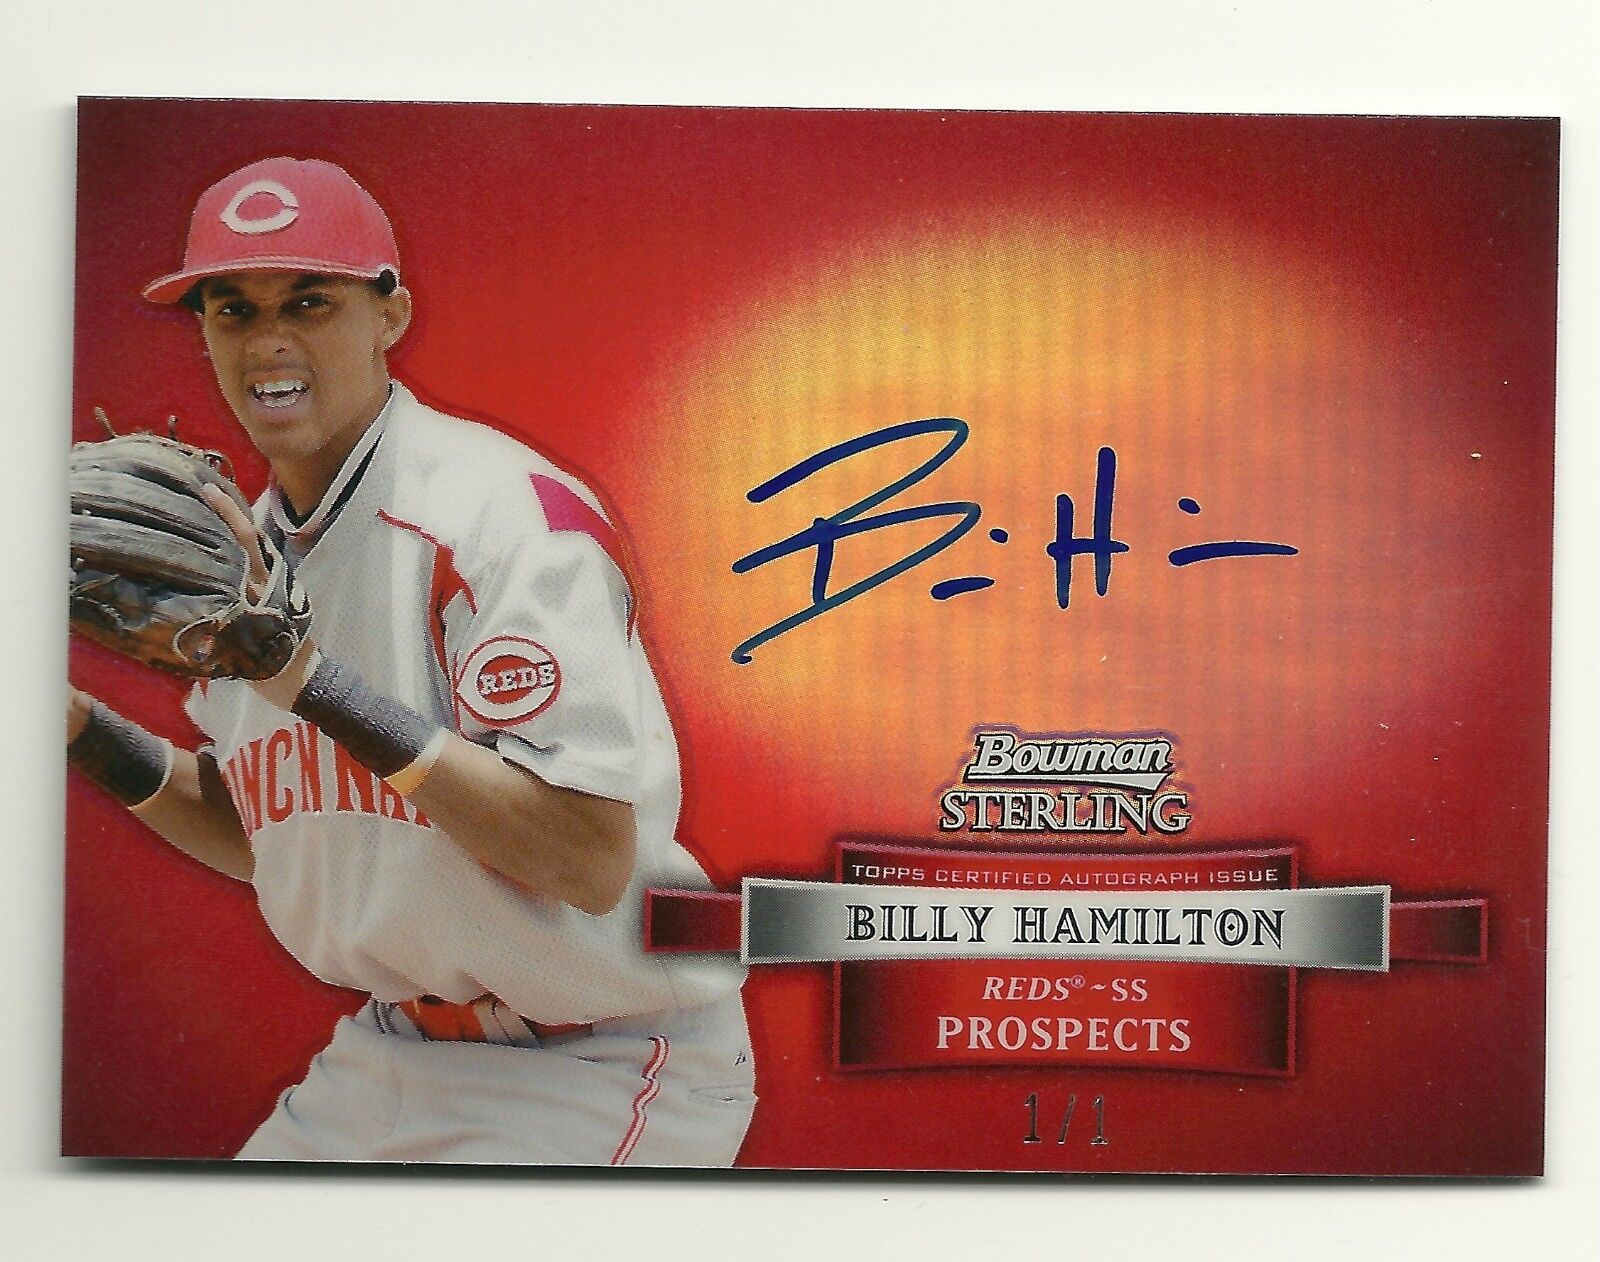 BILLY HAMILTON 2012 BOWMAN STERLING RED REFRACTOR AUTO AUTOGRAPH 1/1 PROSPECT